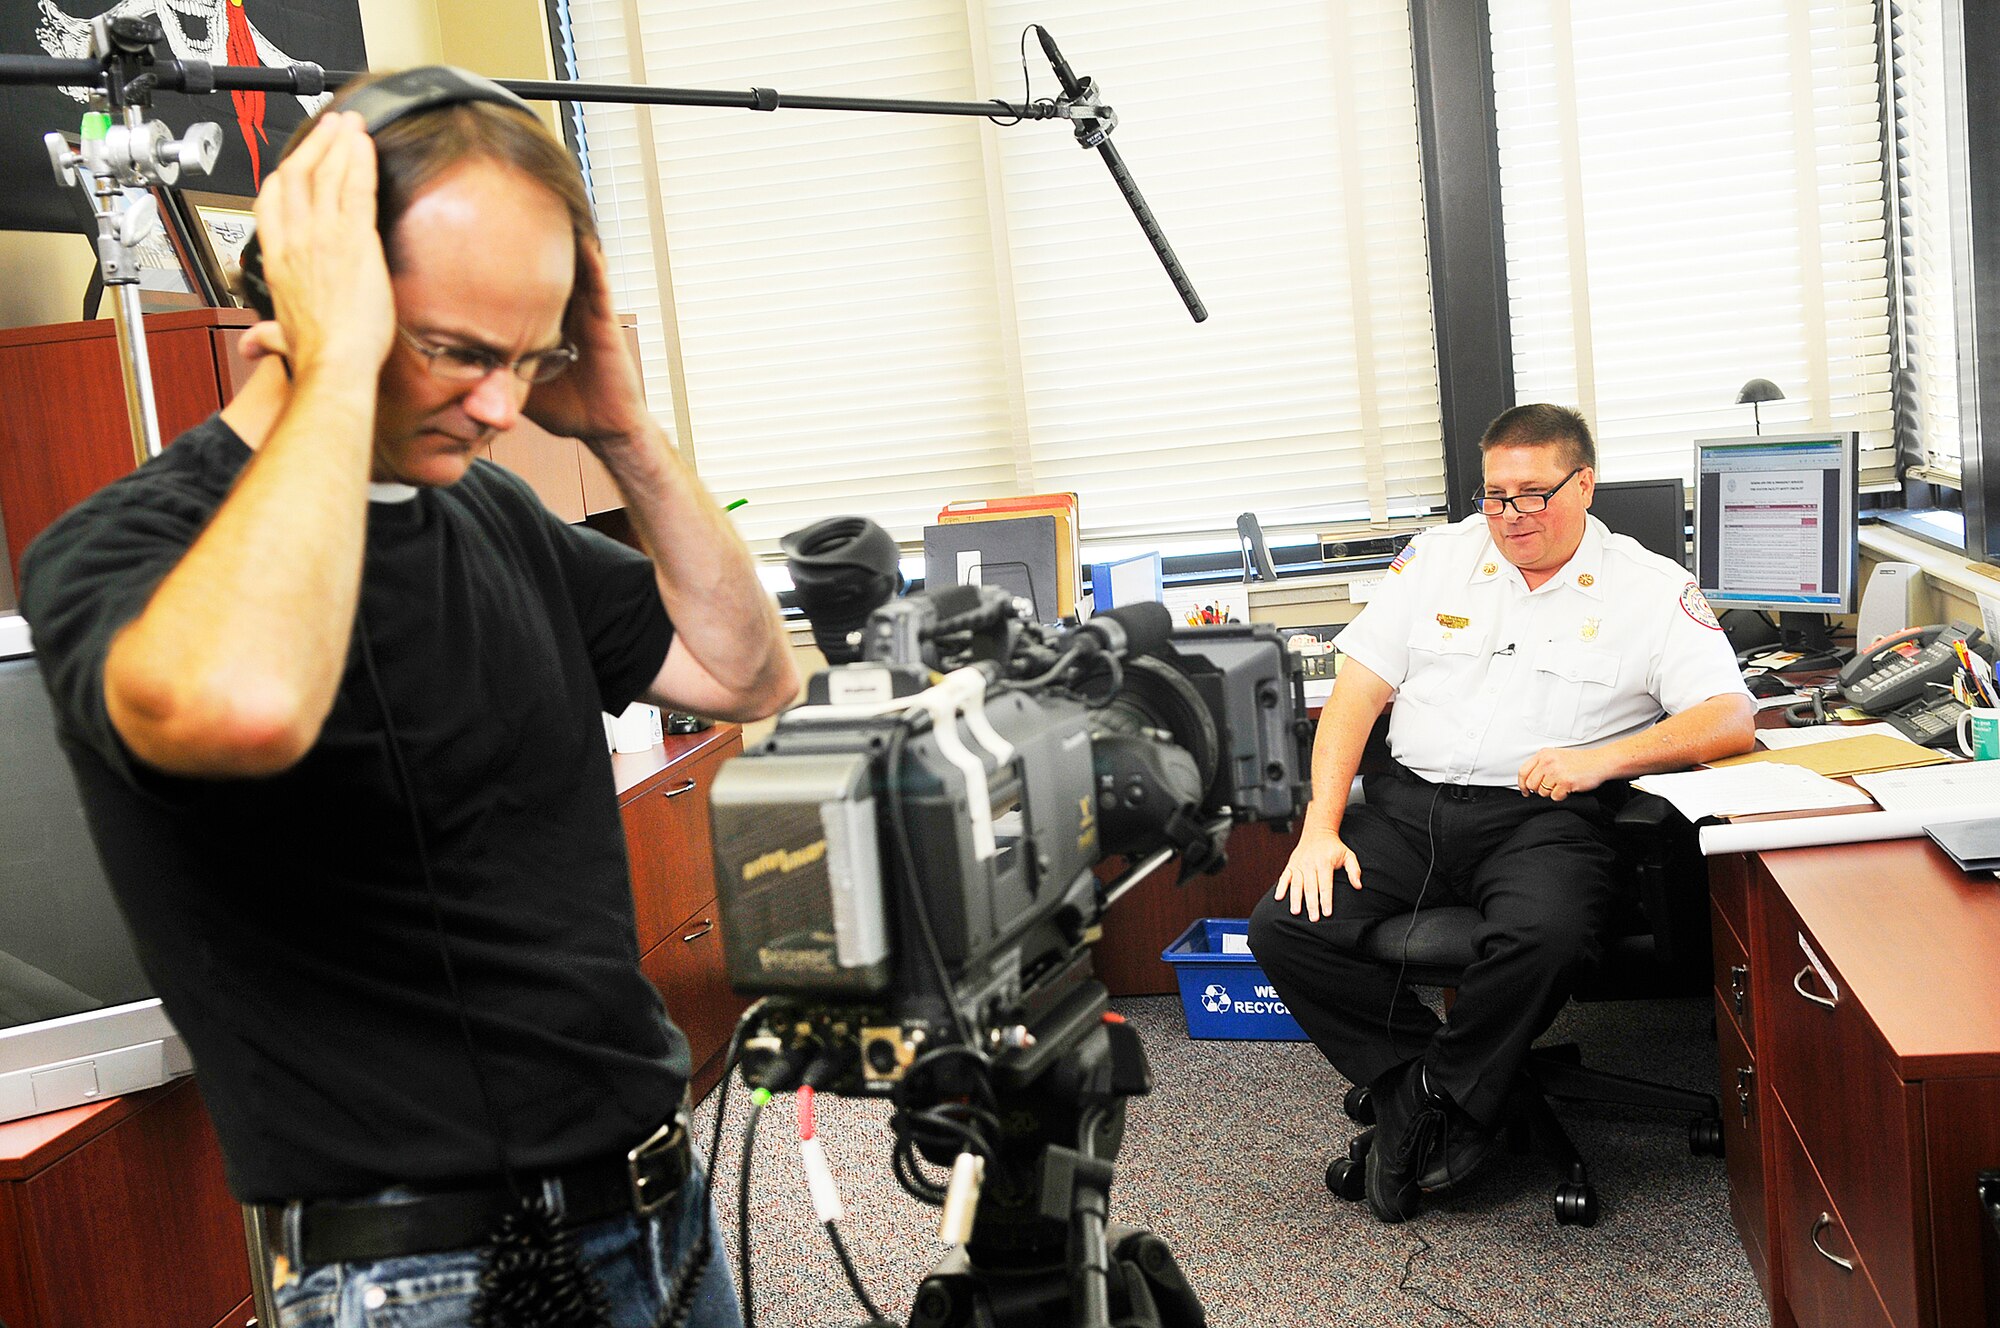 Tim Phillips, director/camera operator, gets prepared to interview Kevin Bartoe. A crew was at Robins May 21-23 to shoot photos and film segments for an Air Force Health and Safety Officer training course.  (U. S. Air Force photo by Sue Sapp)